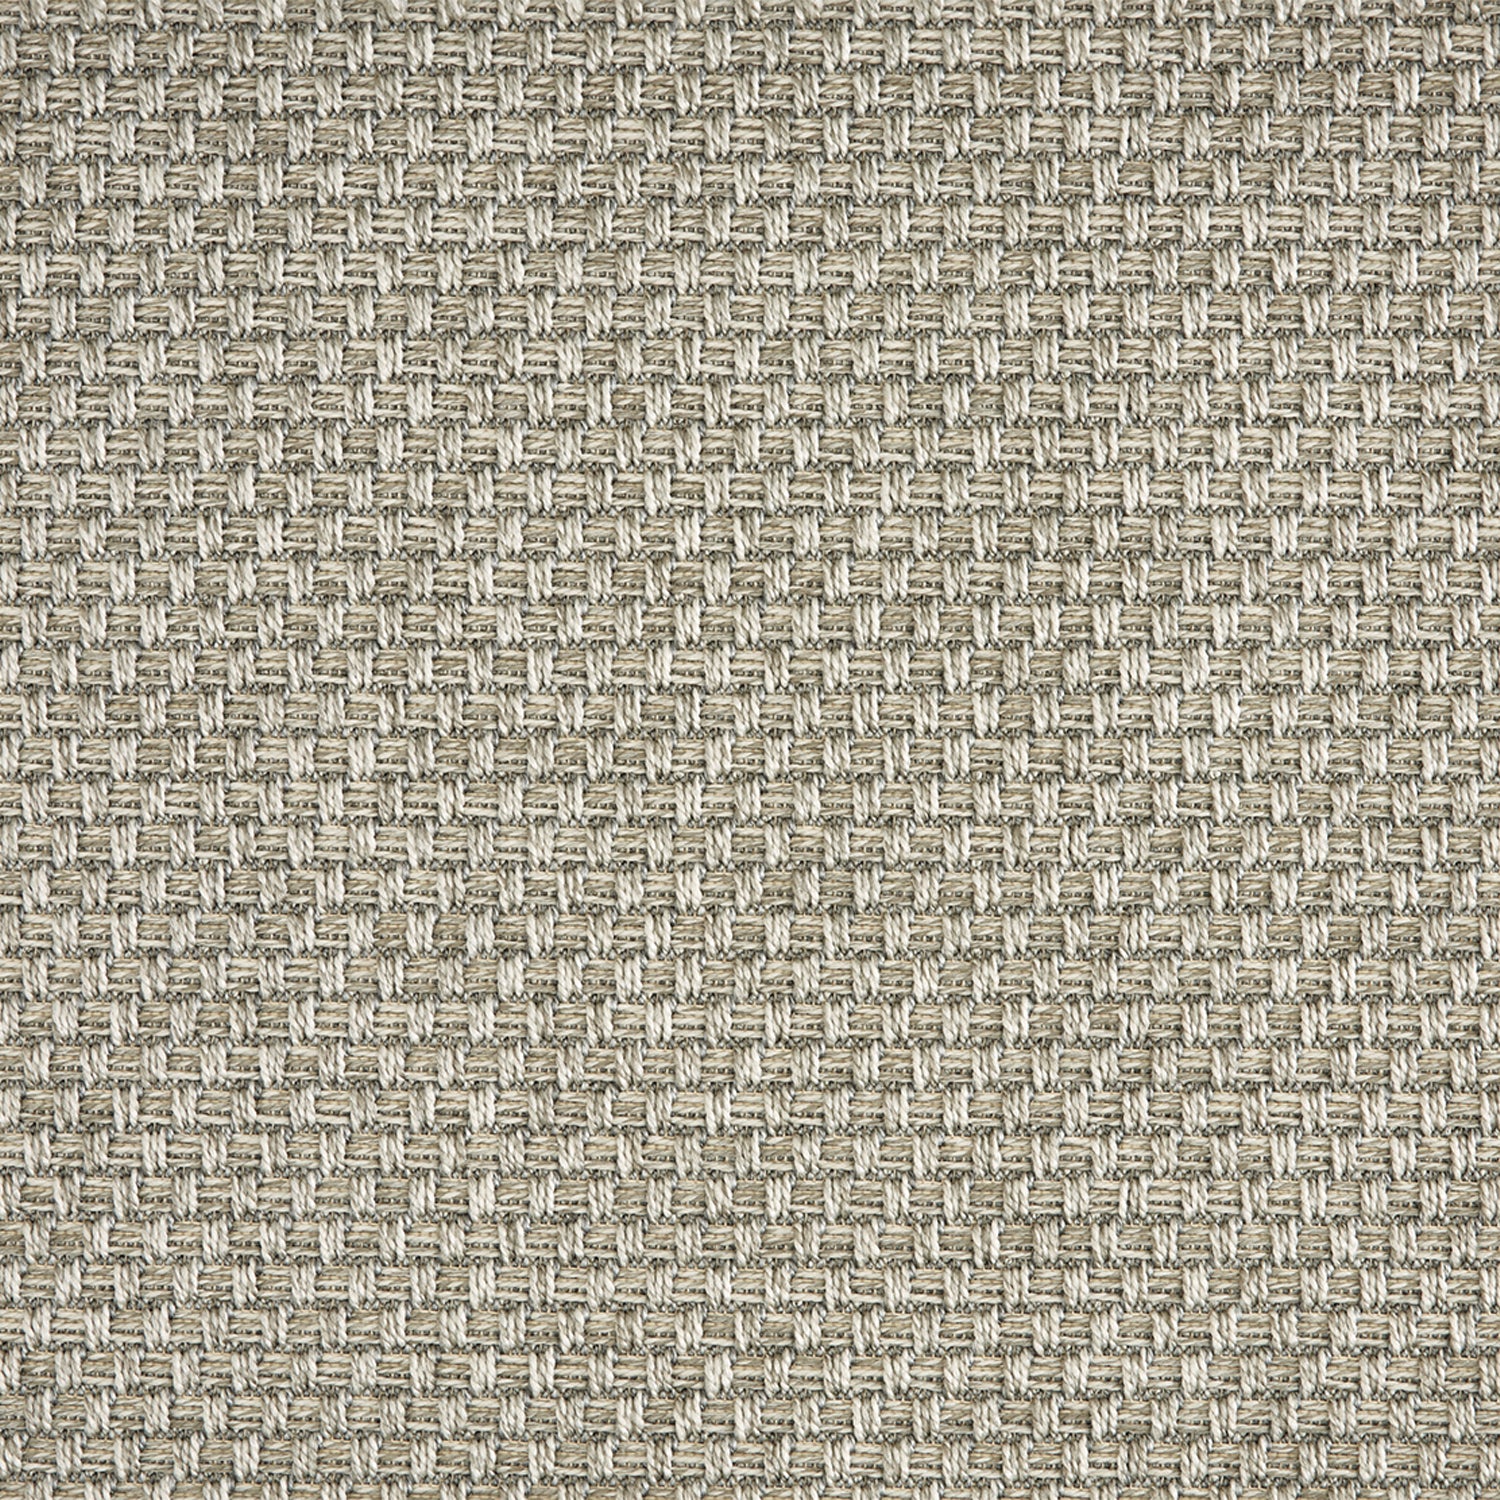 Outdoor broadloom carpet swatch in a flat grid weave in silver and gray.